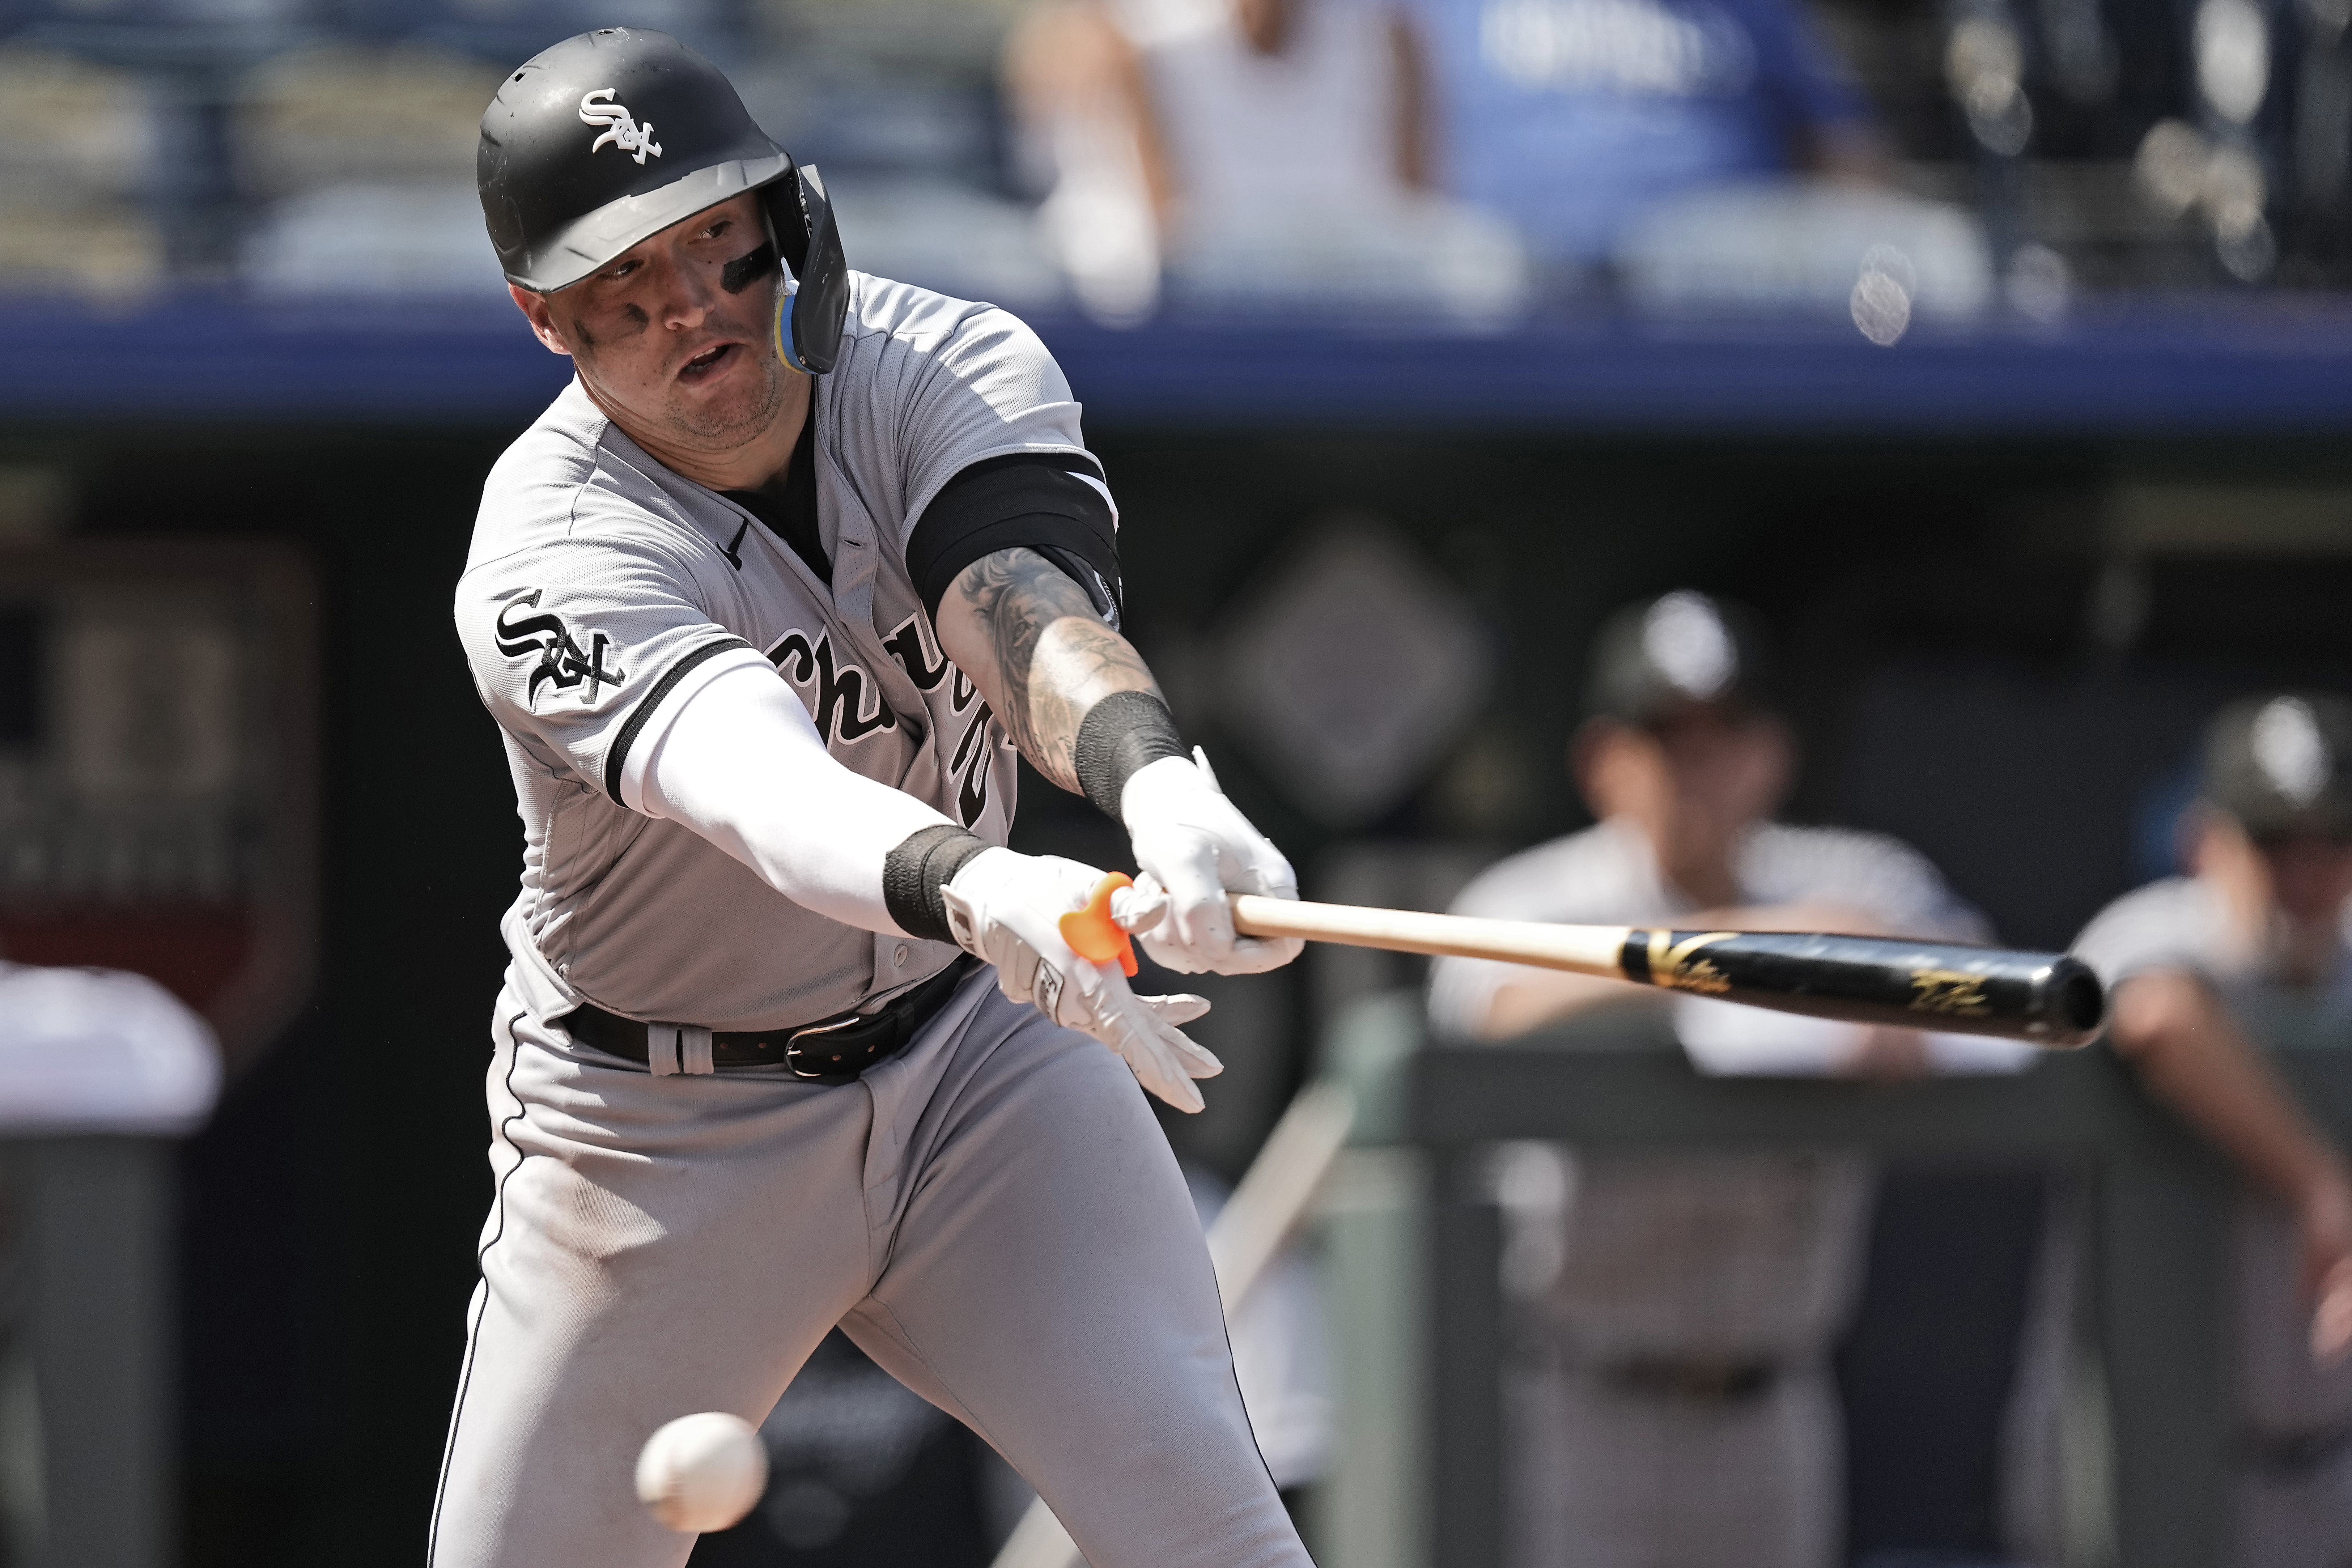 Chicago White Sox: Too many grounders still an issue in 12-1 loss